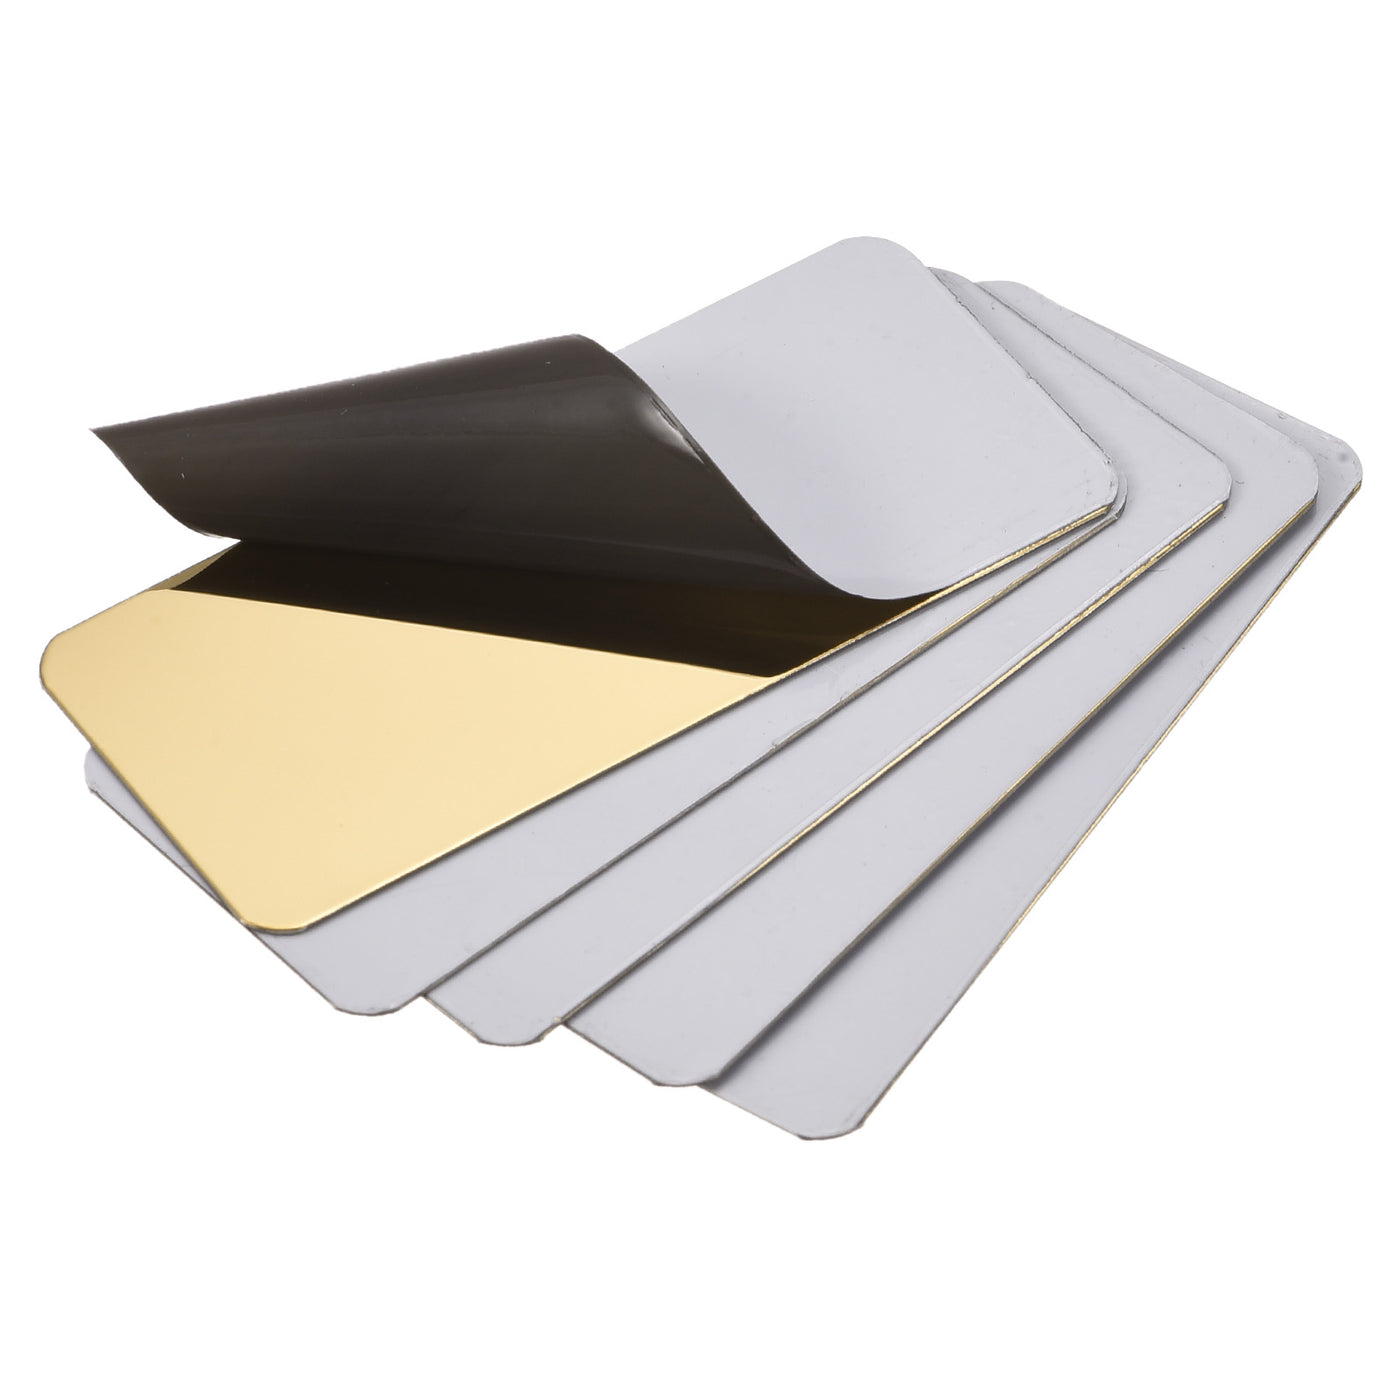 Uxcell Uxcell Blank Metal Card 85x50x0.4mm 201 Stainless Steel Plate Polished Dark Gray 15 Pcs